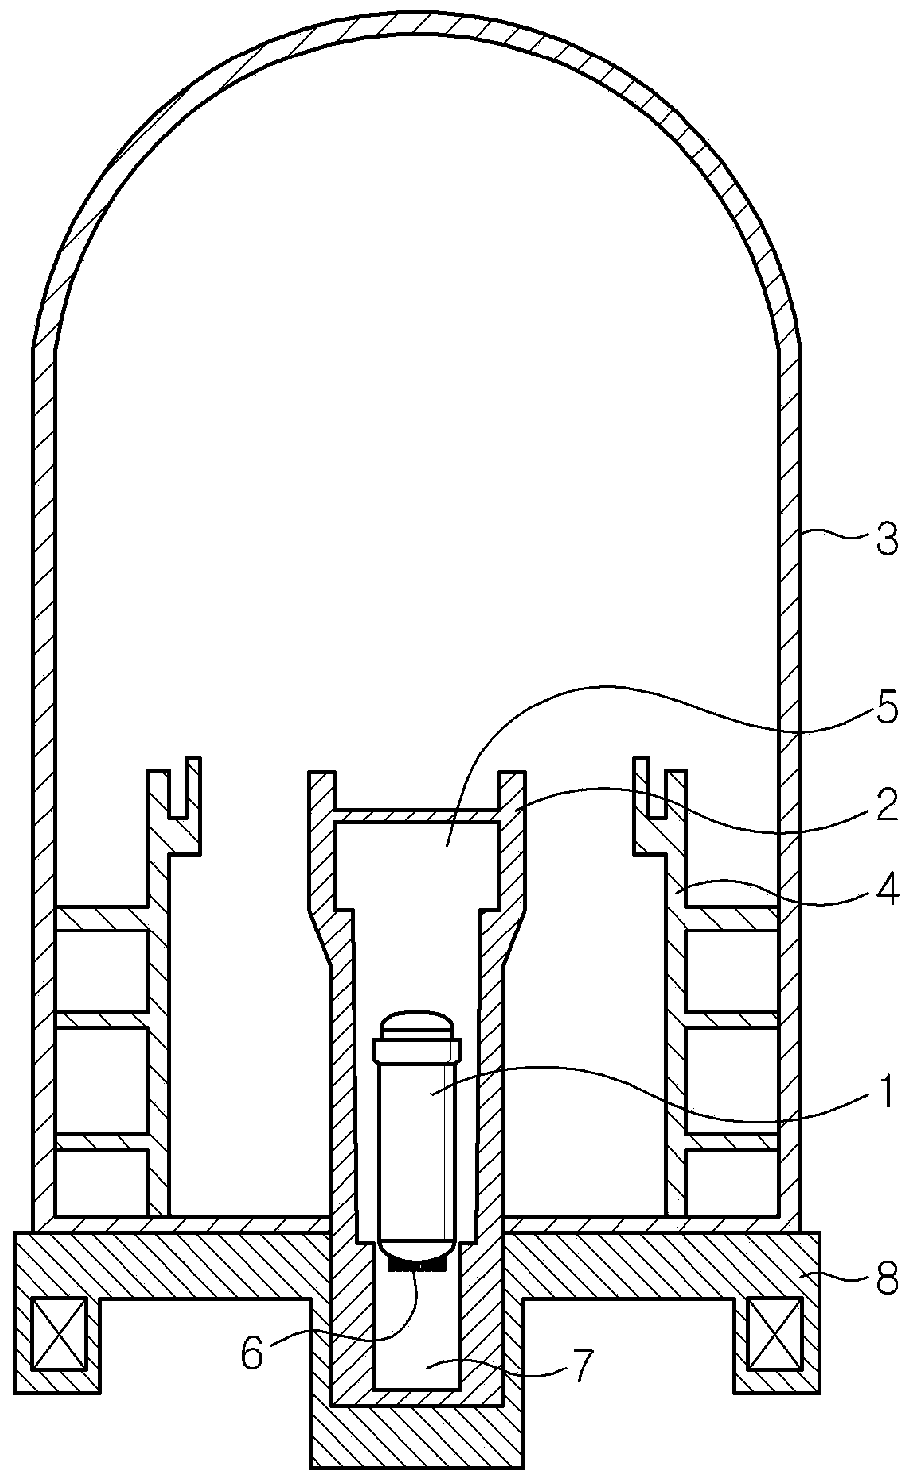 Apparatus for treating molten atomic reactor fuel rod using vertical cavity